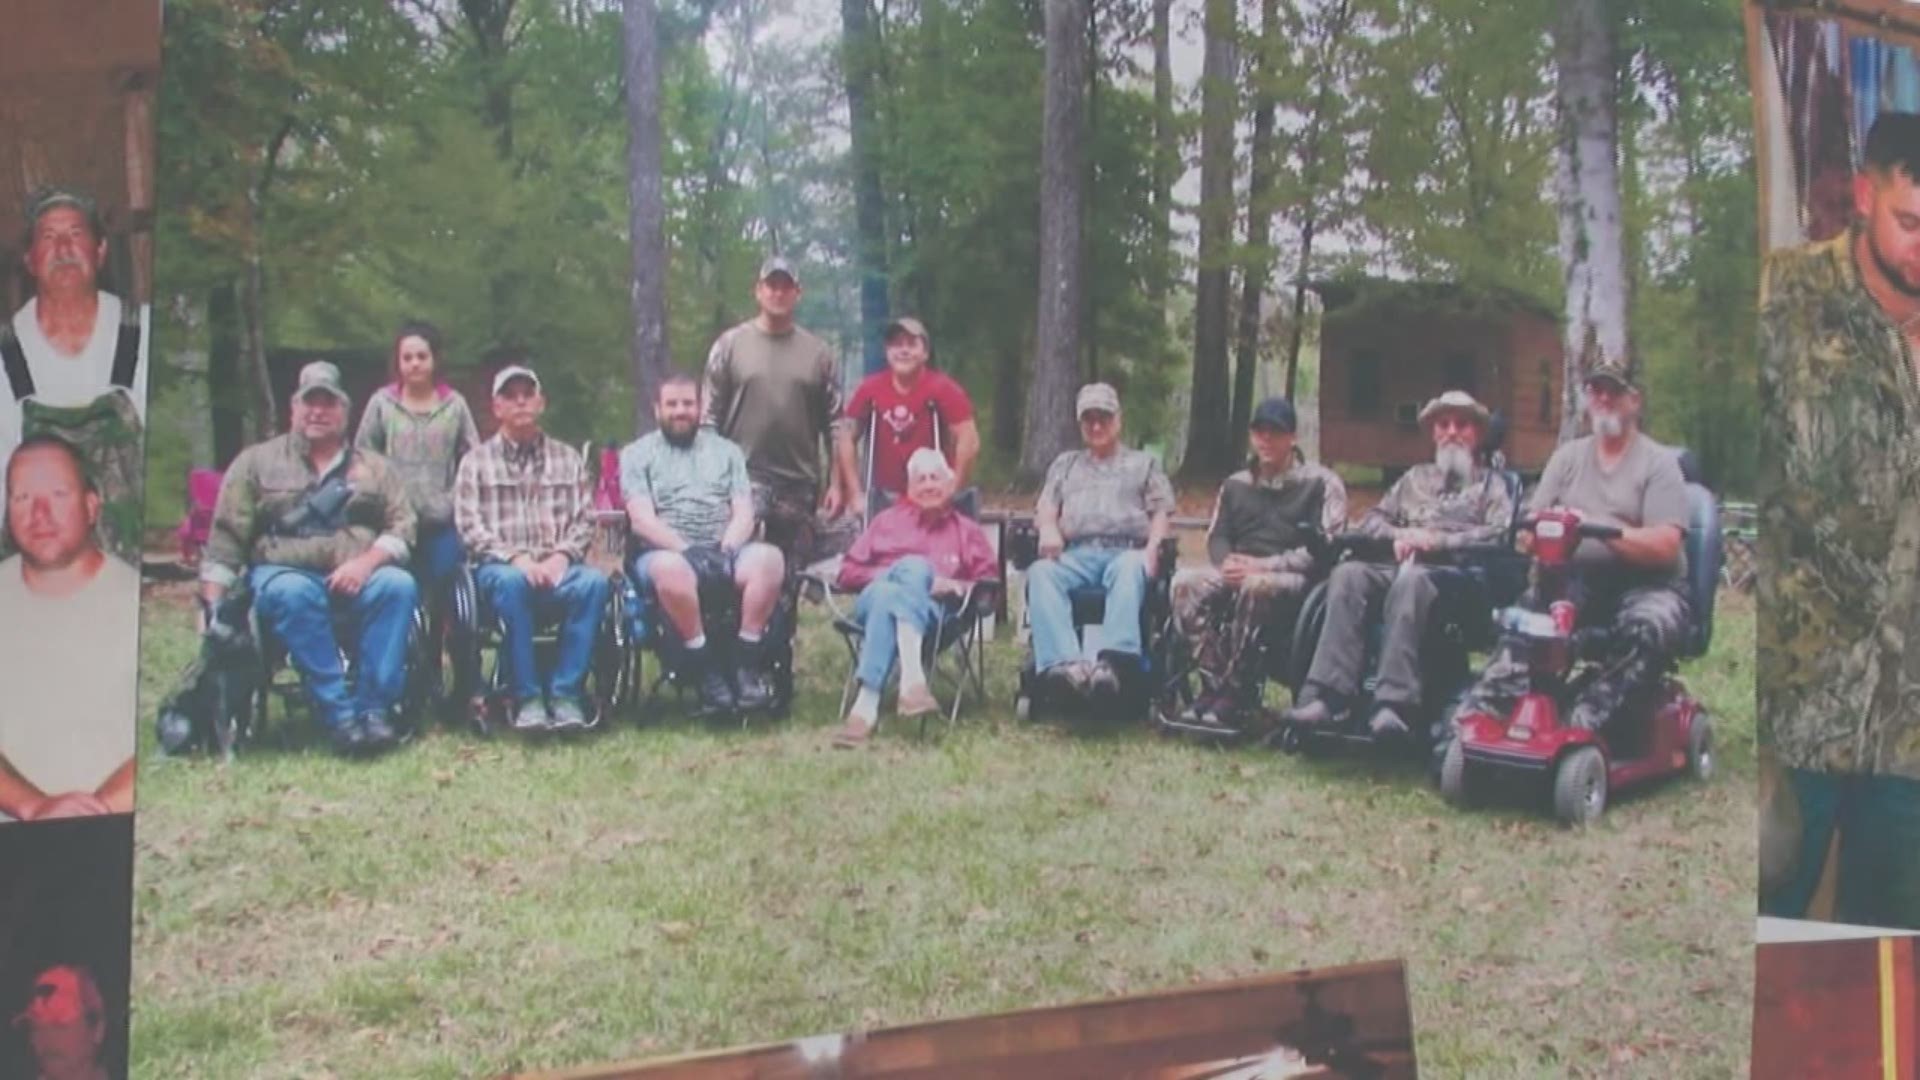 Big Thicket Hogs and Strings Fest raises money for disabled veterans and kids